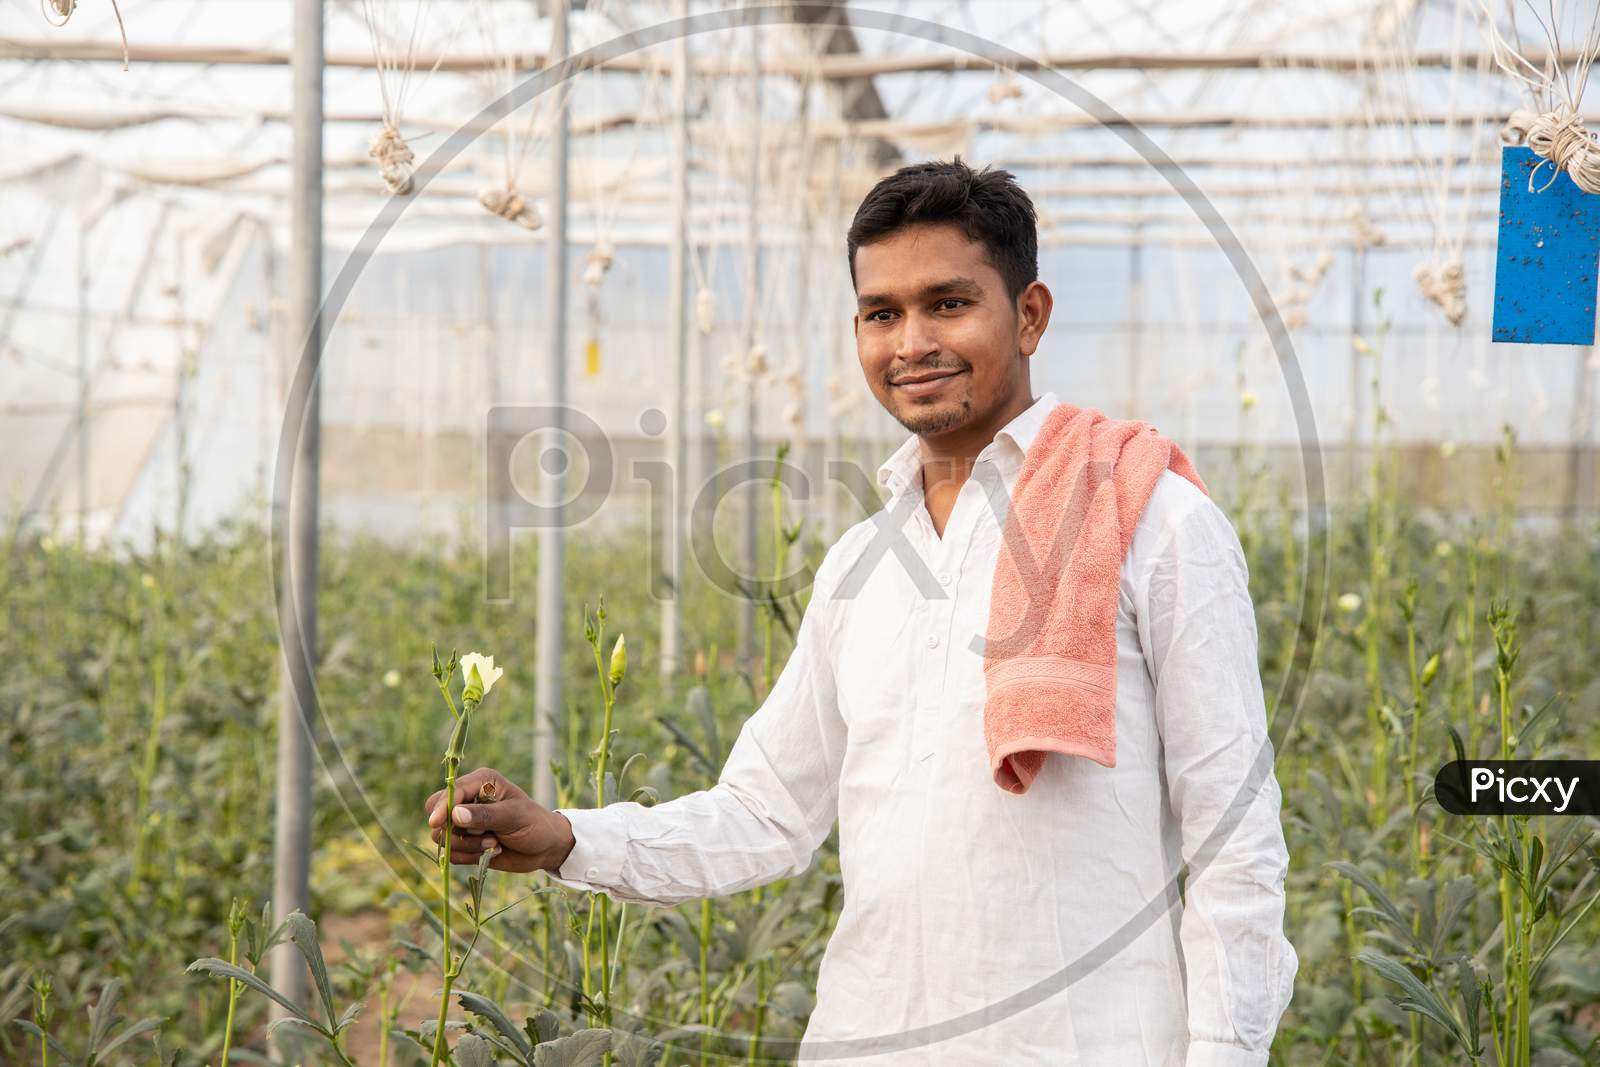 Young Indian Farmer Smiling While Holding Plant Crop At His Poly House Or Greenhouse, Agriculture Business And Rural Prosperity Concept. Man Wearing White Cloths, Copy Space